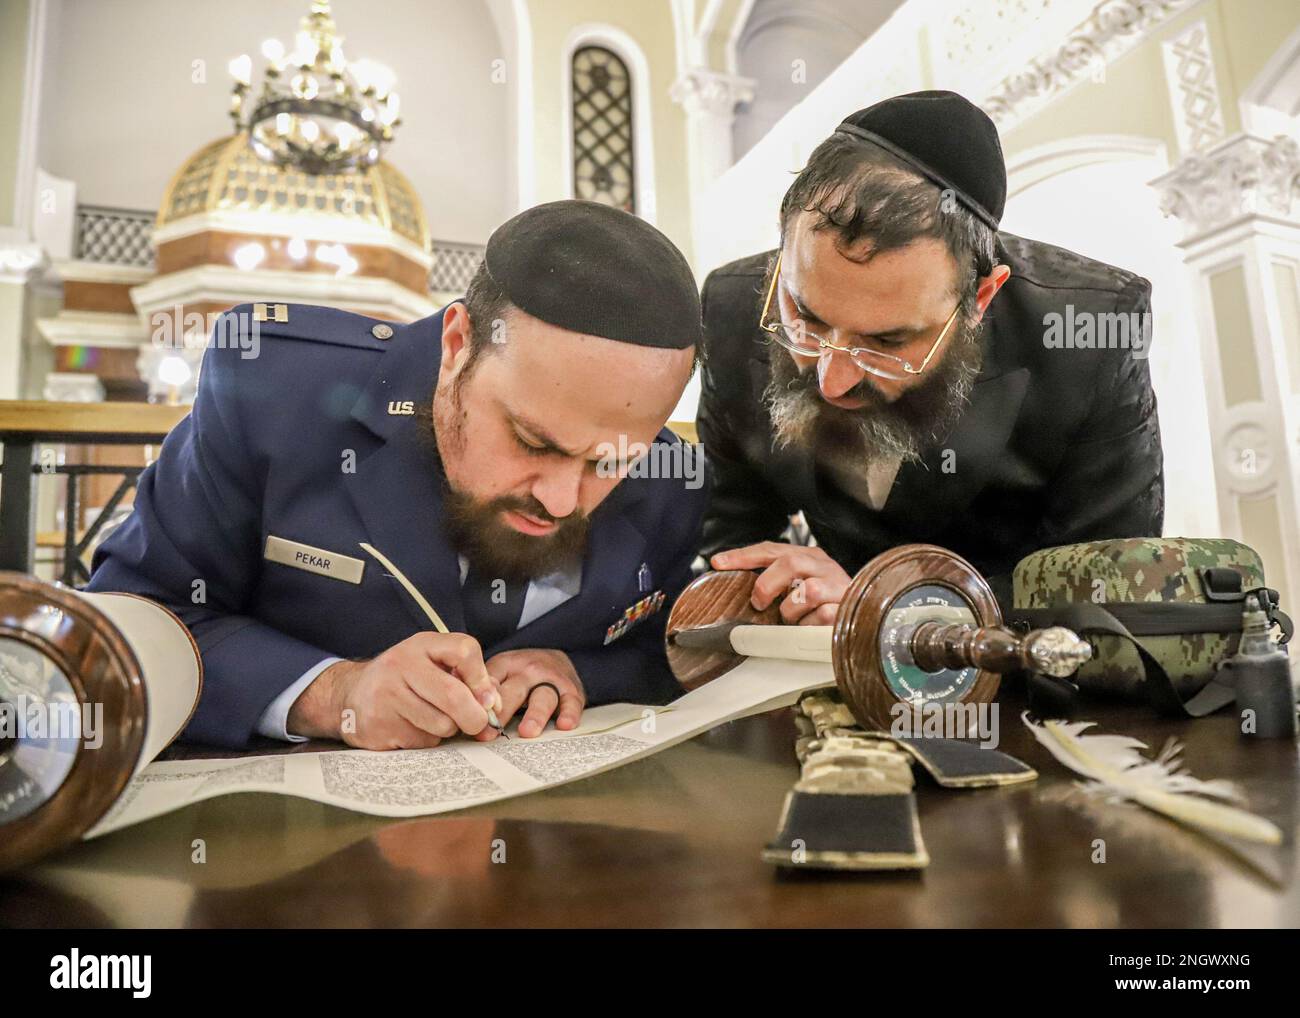 WARSAW, Poland - U.S. Air Force Capt. Levy Pekar, left, from Beitar, Israel, Chaplain of the 86th Airlift Wing based out of Ramstein Air Base, Germany, signs a Torah Scroll dedicated to the Ukrainian Army as Hillel Cohen, Military Rabbinate of Ukraine, watches during the ceremony, Nov. 29, 2022, Warsaw, Poland. Jewish Chaplains alongside distinguished guests, refugees from Ukraine, and U.S. ally partner nations attended the event to support the Ukrainian Chaplaincy’s religious support efforts. Stock Photo